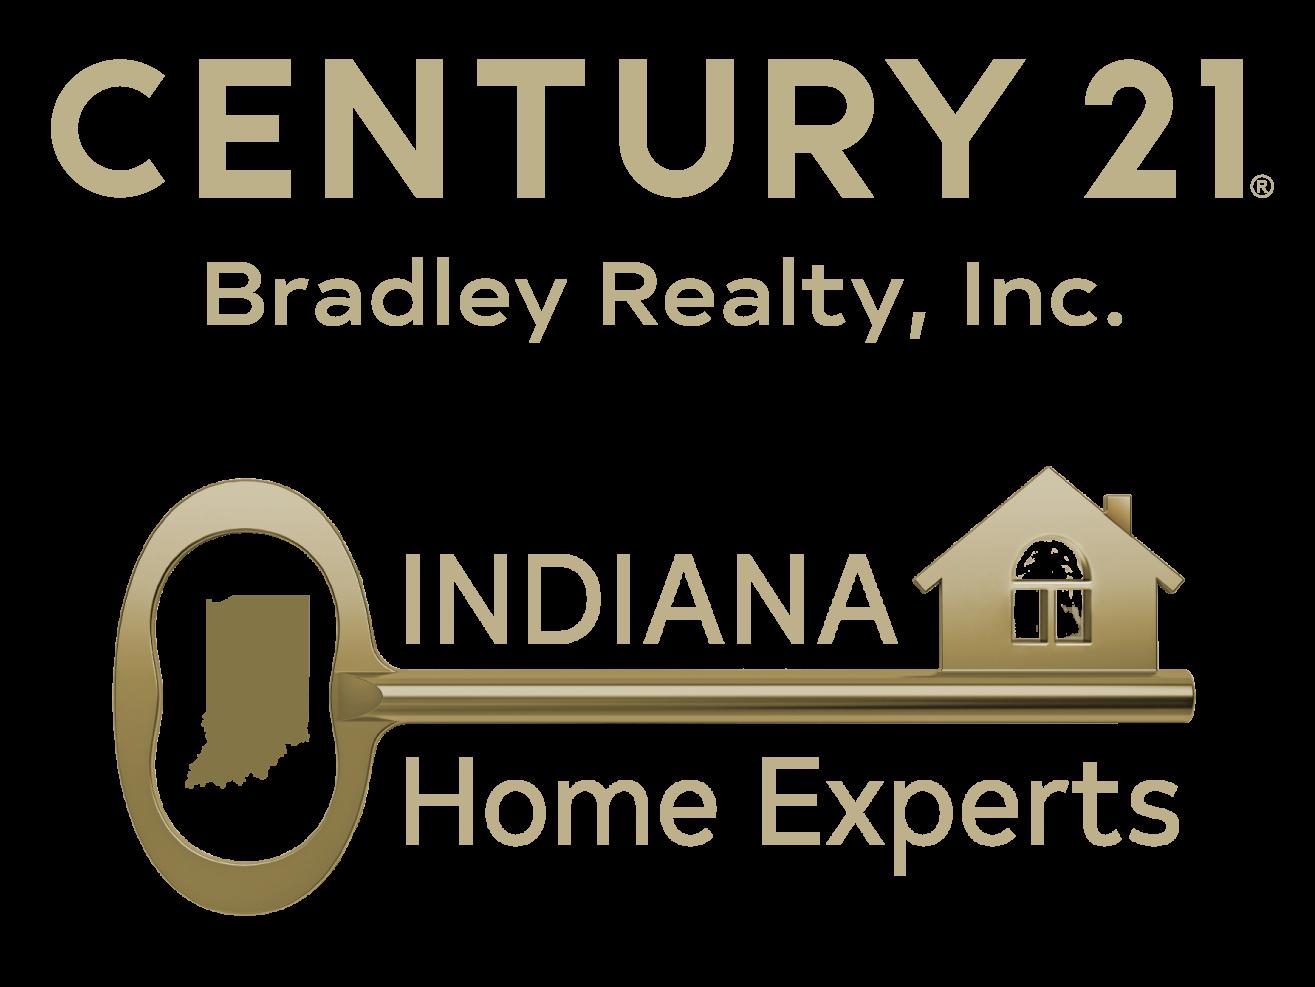 Indiana Home experts of CENTURY 21 Bradley Realty, Inc. photo